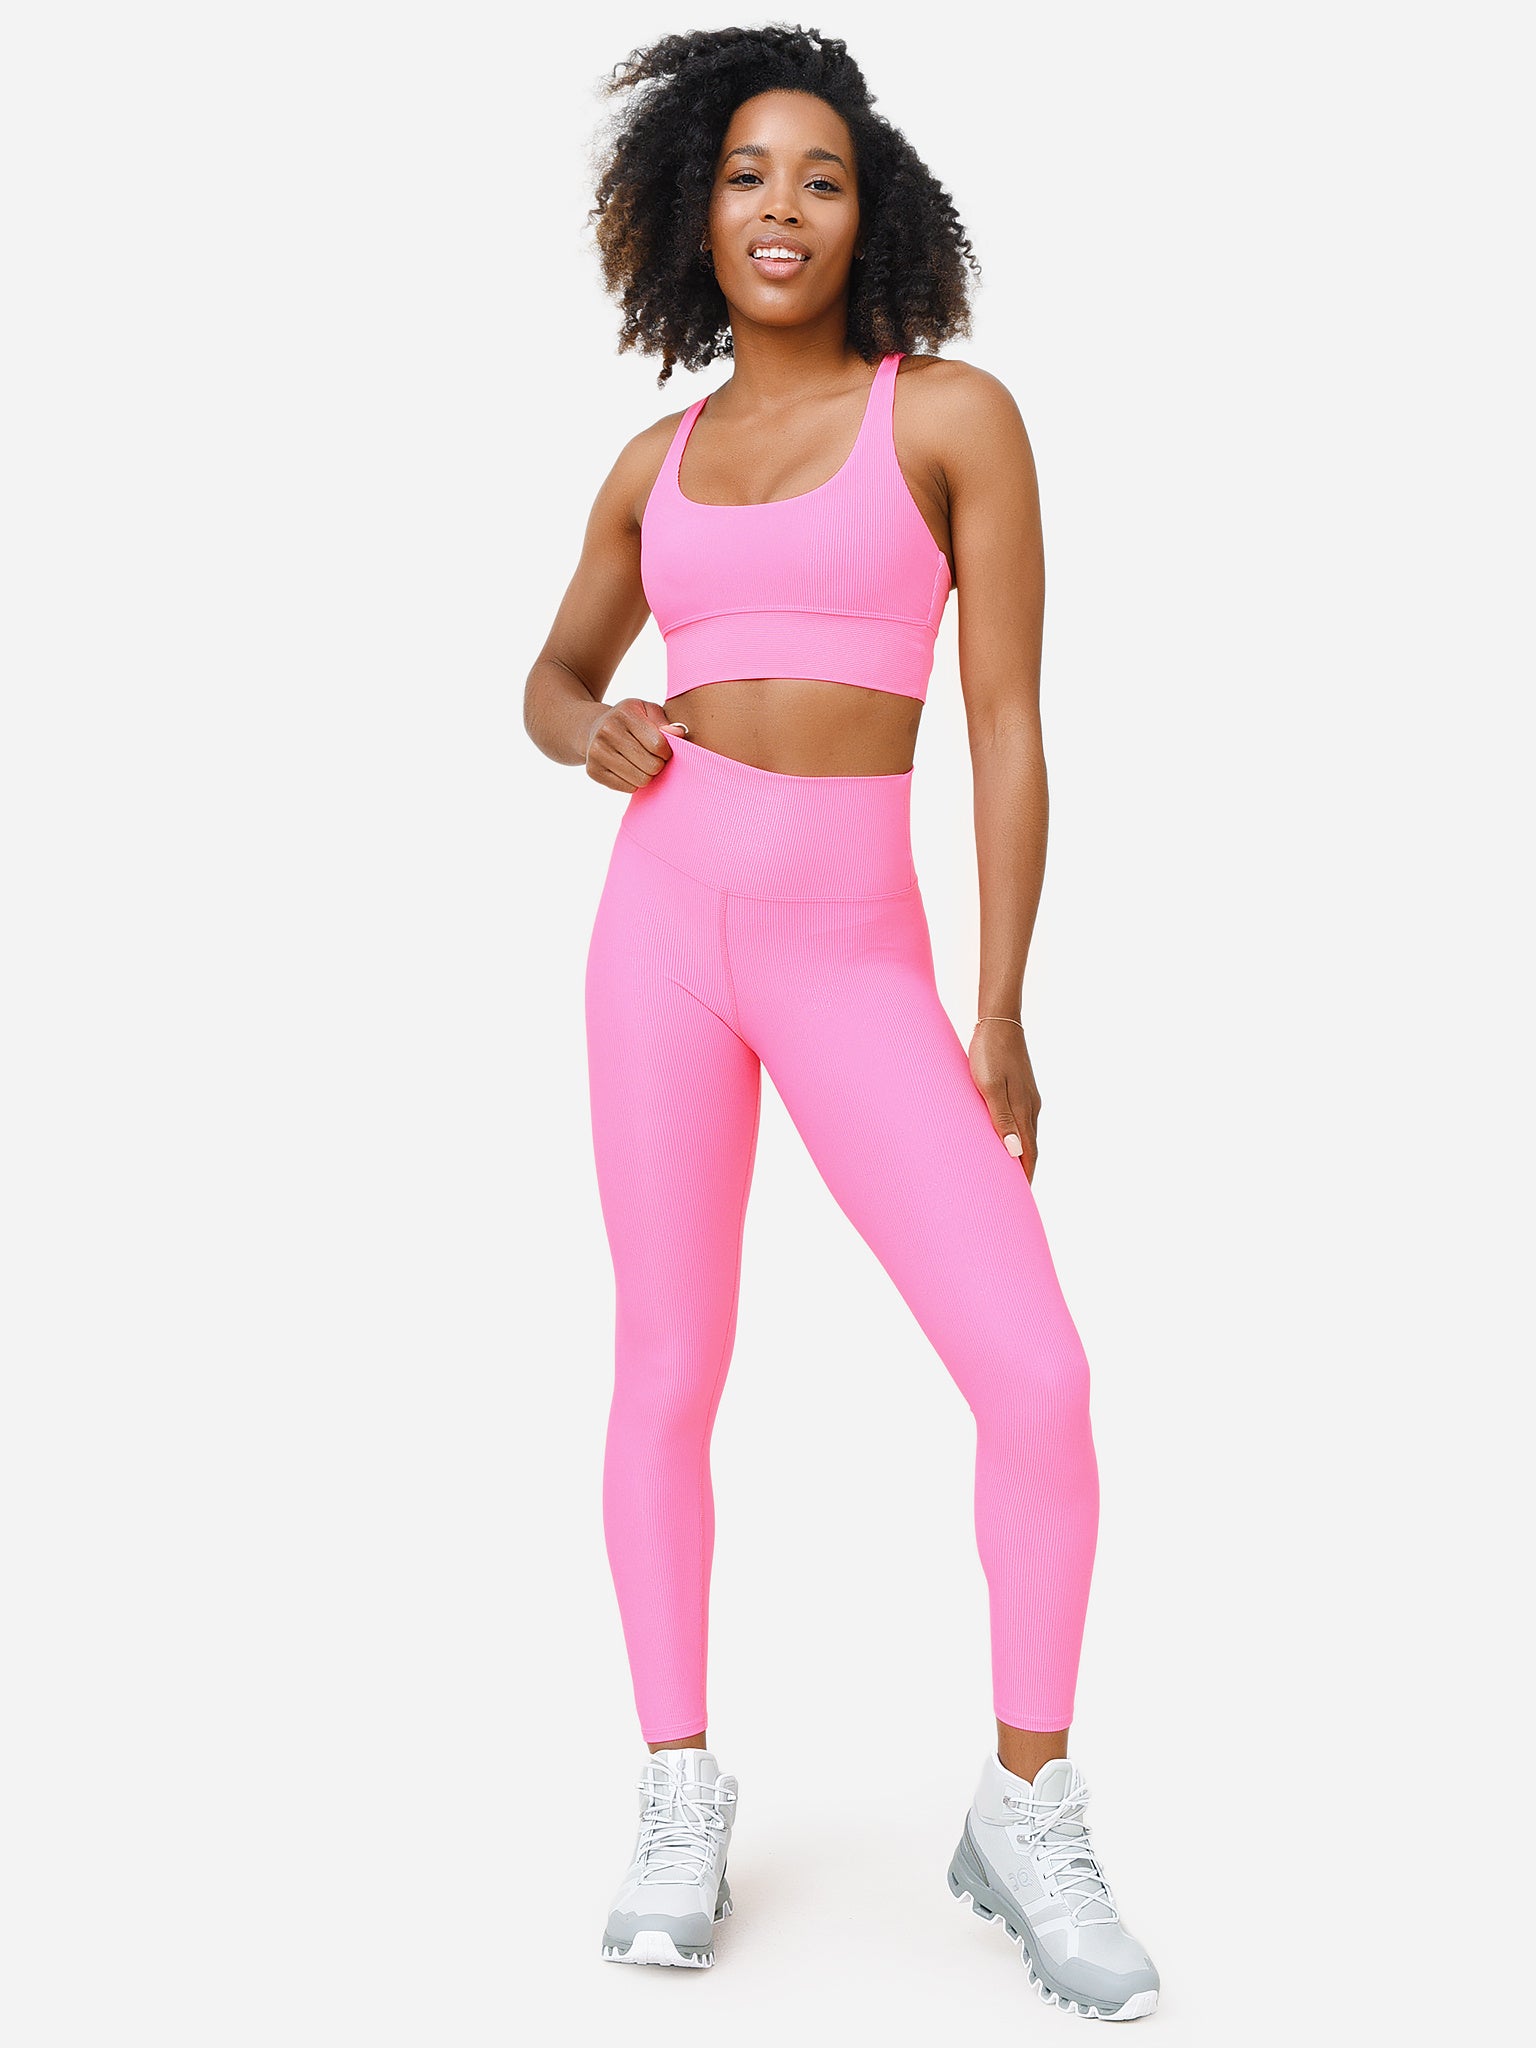 Fashion Look Featuring LoveShackFancy X Beach Riot Activewear and